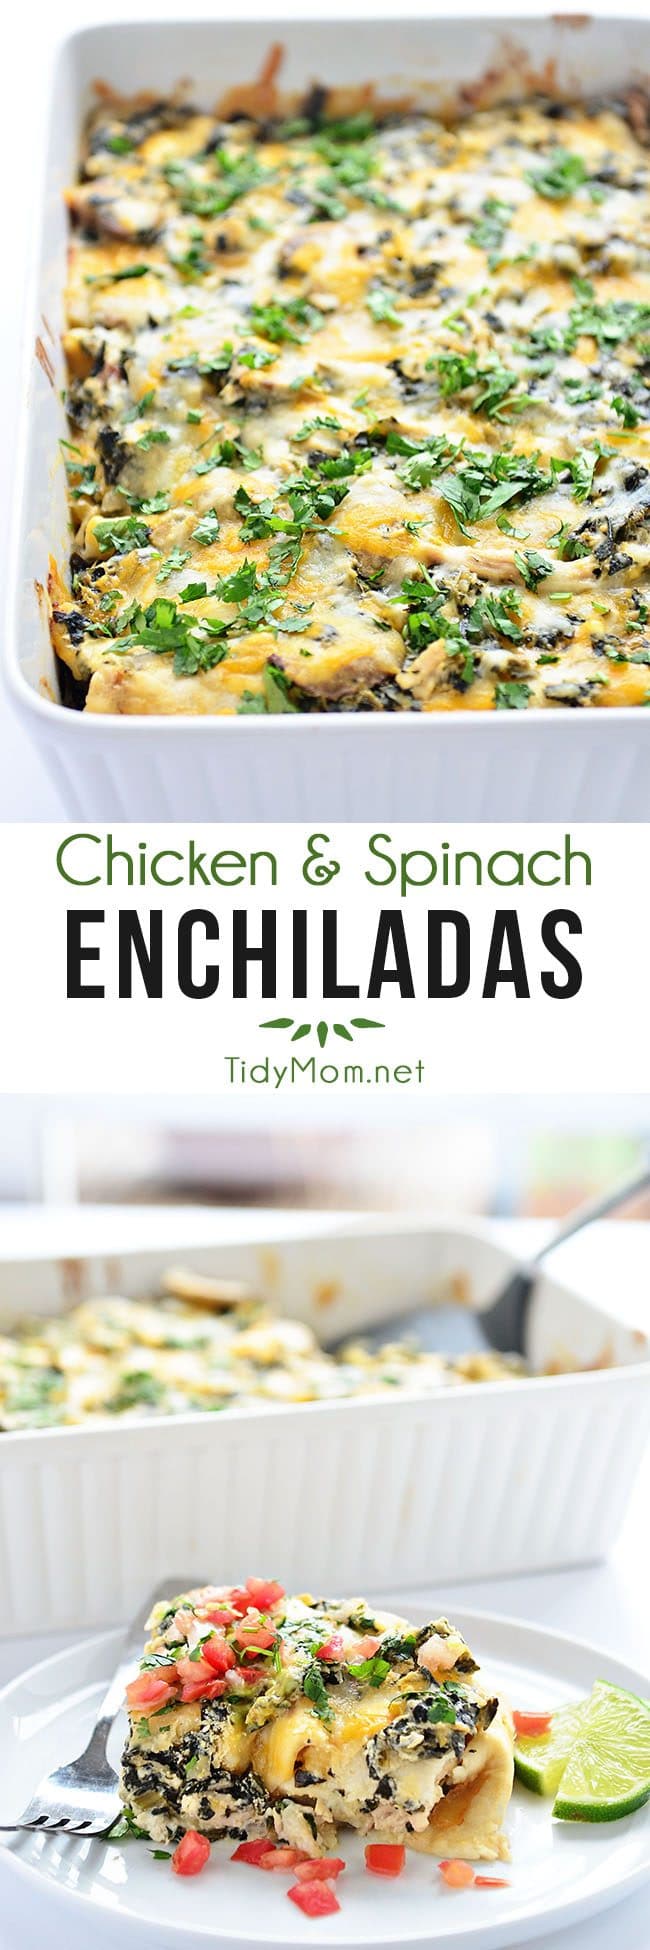 Chicken and Spinach Enchiladas on a plate